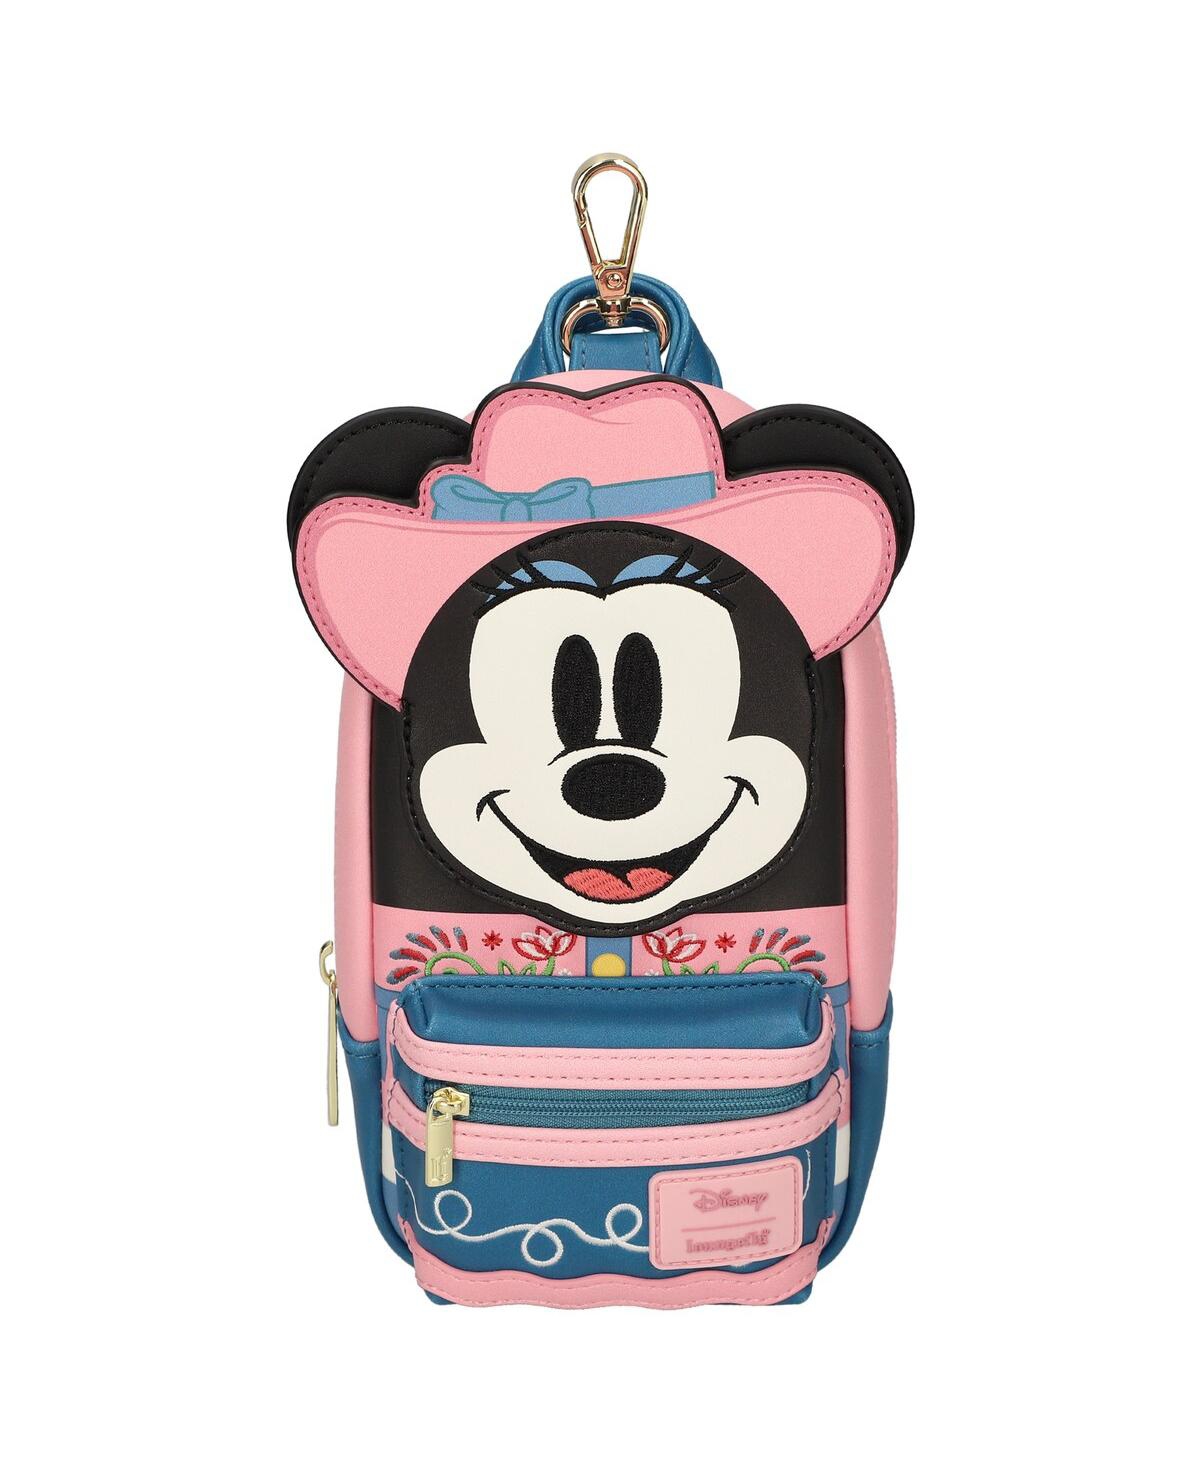 Loungefly Minnie Mouse Western Mini Backpack Pencil Case In Pink